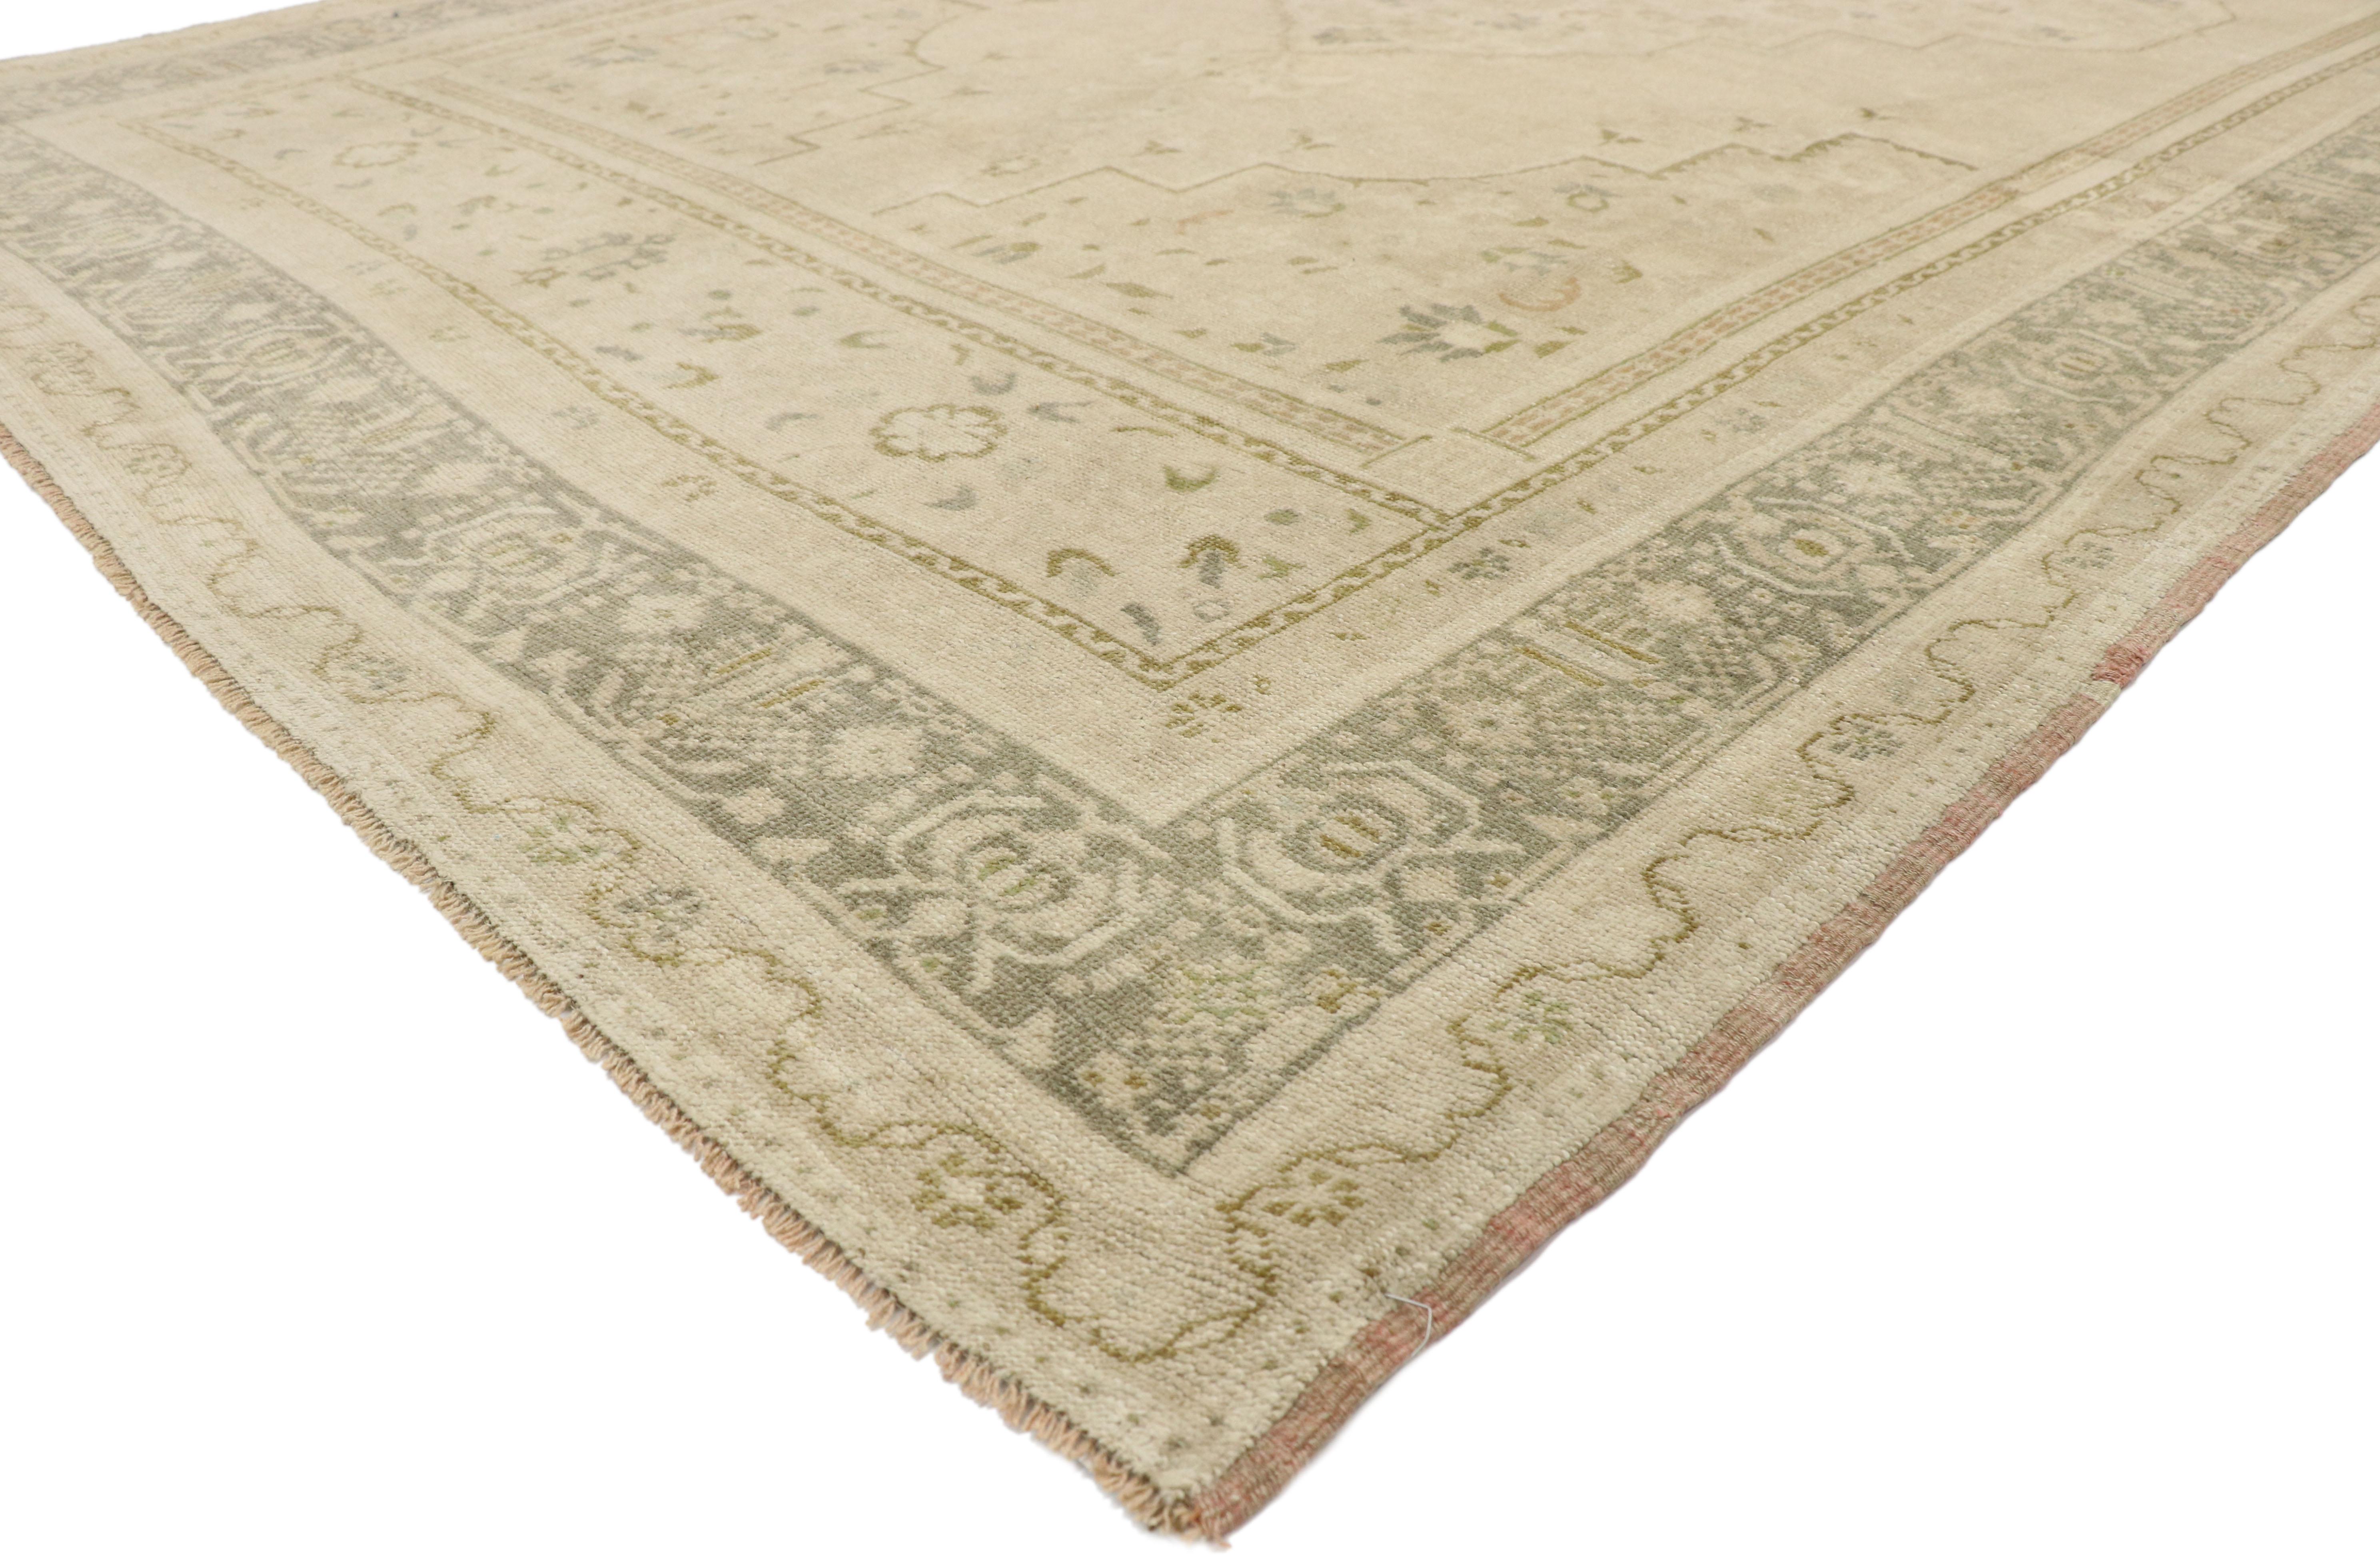 52833 Muted Vintage Turkish Oushak Rug, 07'05 x 13'08.
Easygoing elegance meets effortlessly chic in this hand knotted wool vintage Turkish Oushak rug. The faded botanical design and neutral earth-tone colors woven into this piece work together